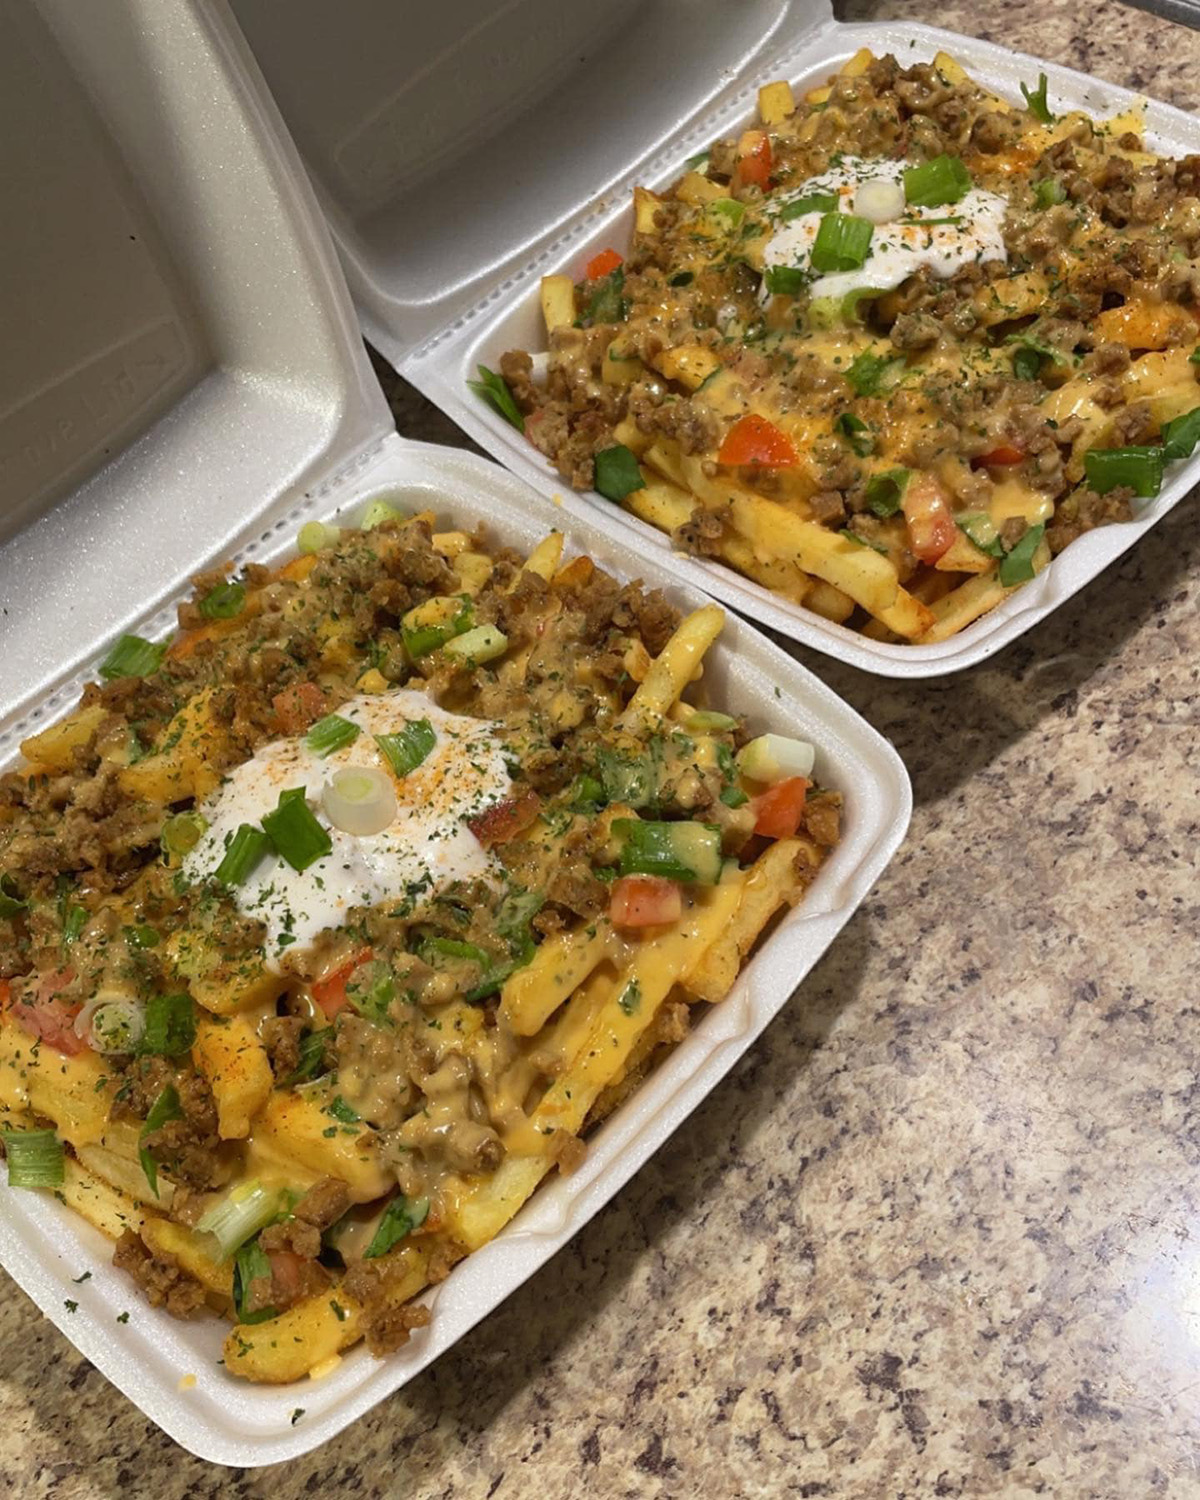 Two styrofoam take-out containers very full of french fries with toppings including vegan cheese, vegan meat, green onions, tomatoes, jalapenos, and spices. Photo by Lamiea Wilson.